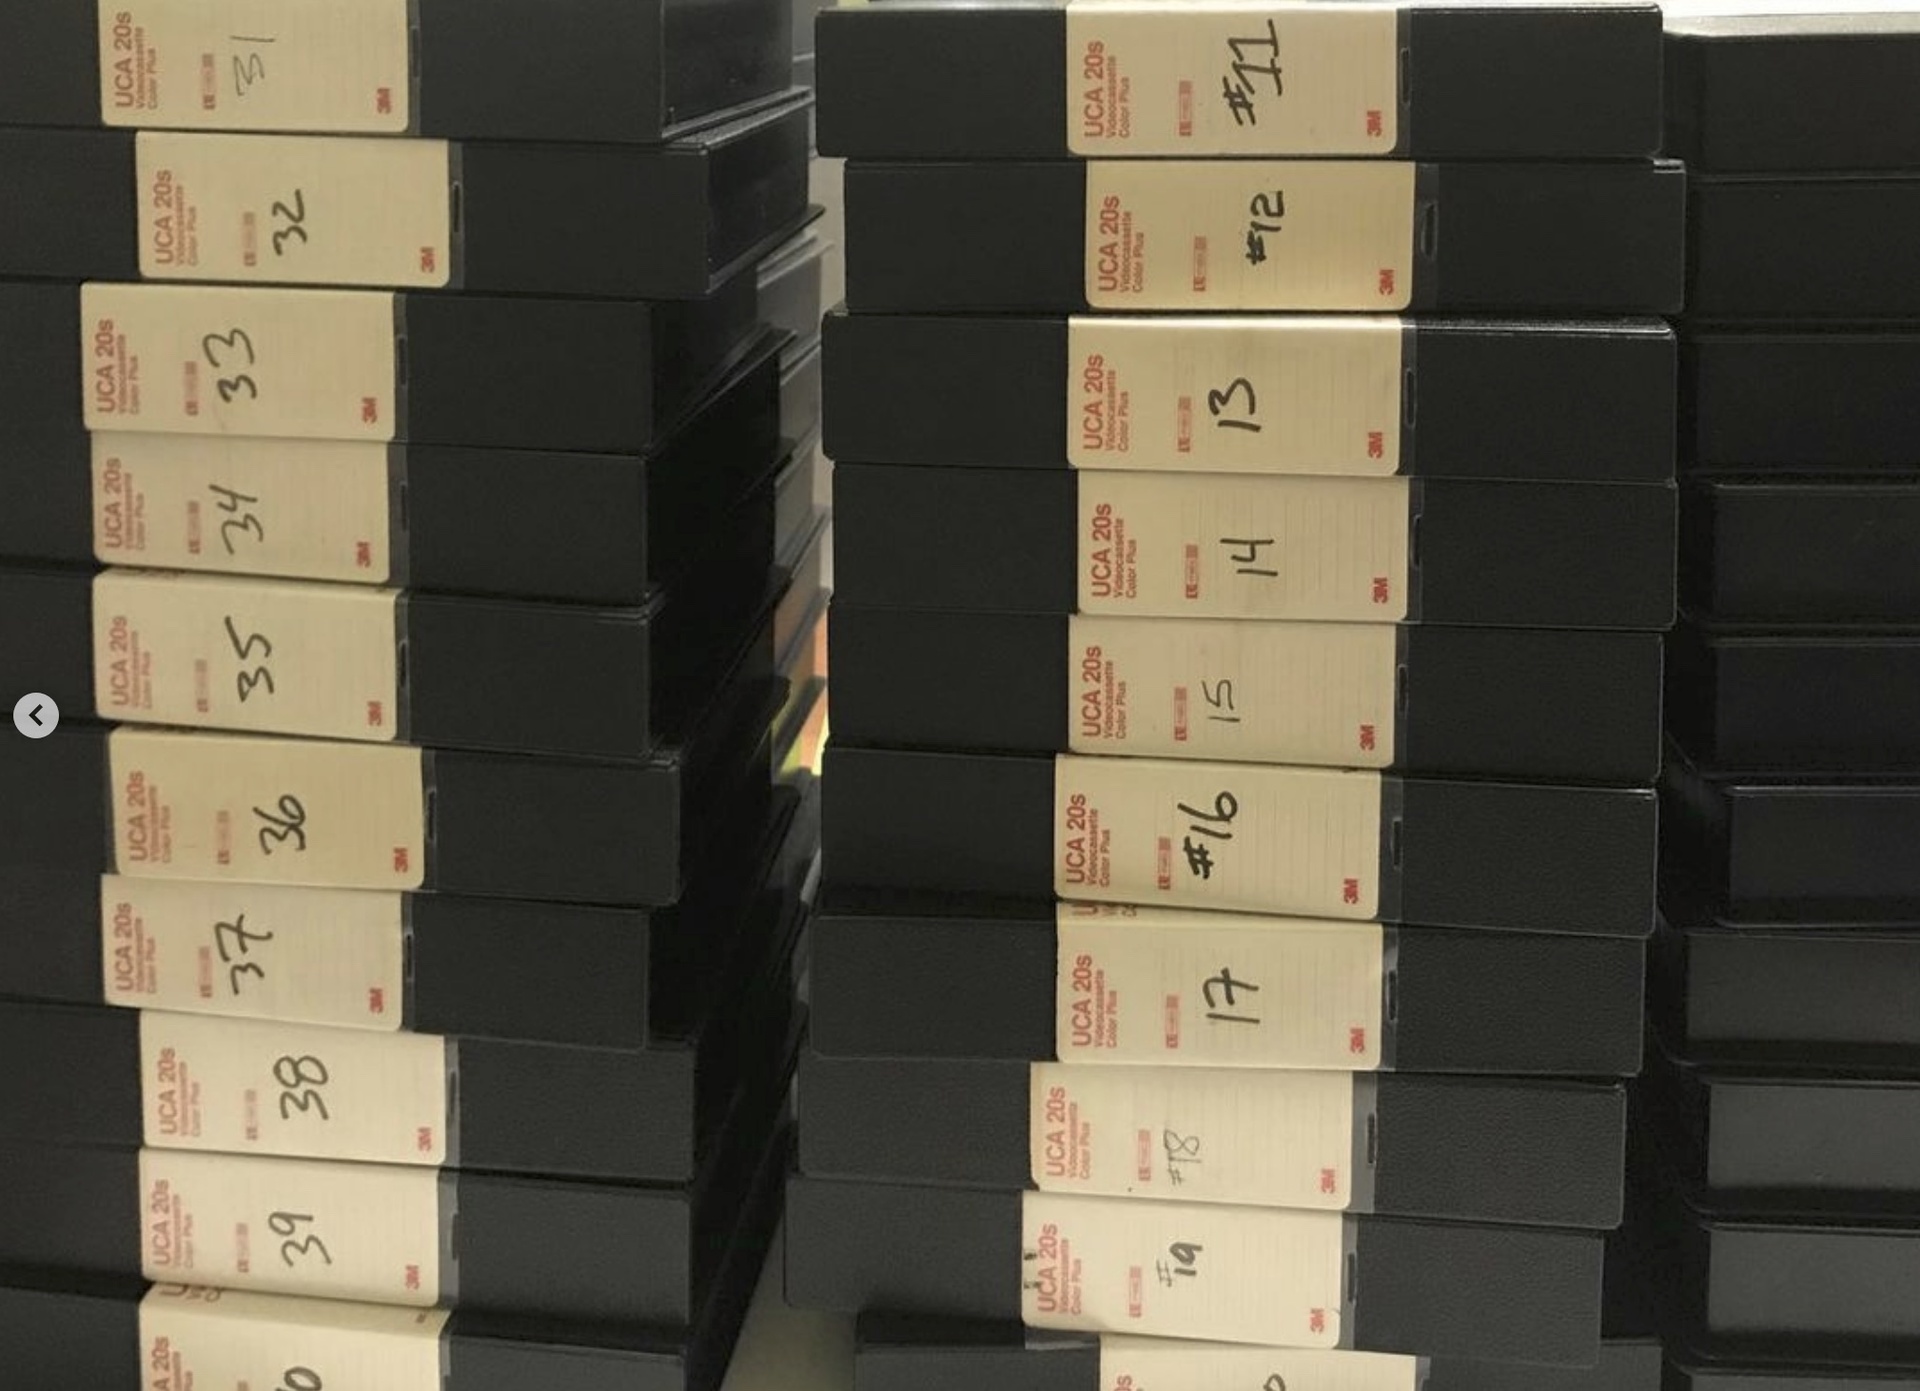 VHS video tapes in the Penland archives. Image courtesy of Penland School of Craft.